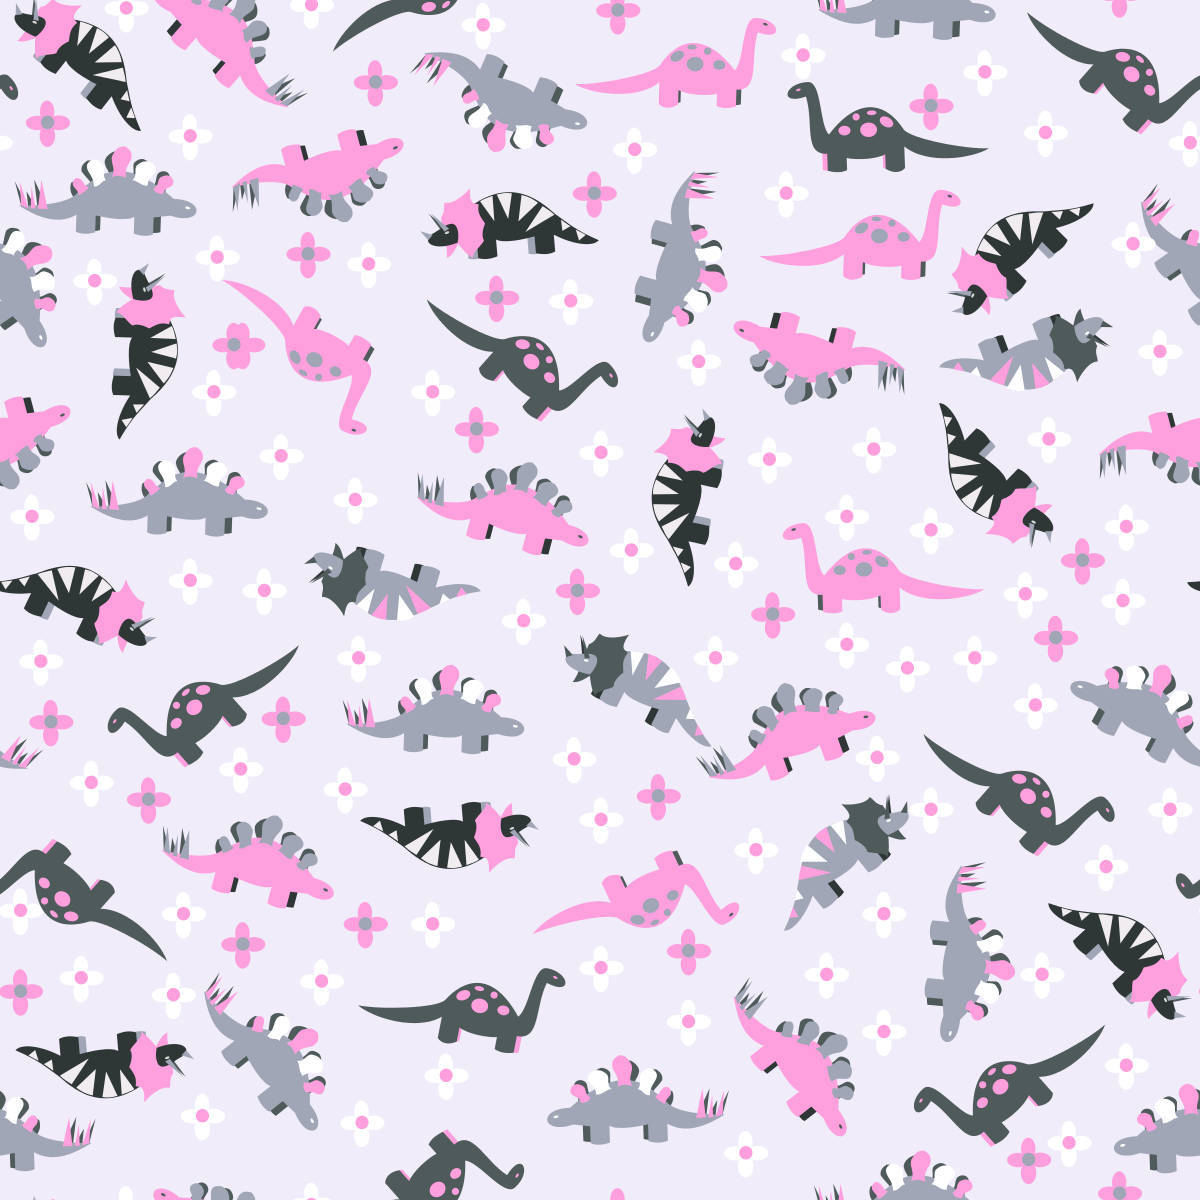 A deceptively intricate pattern of cute dinosaurs on a pastel pink background. Wallpaper